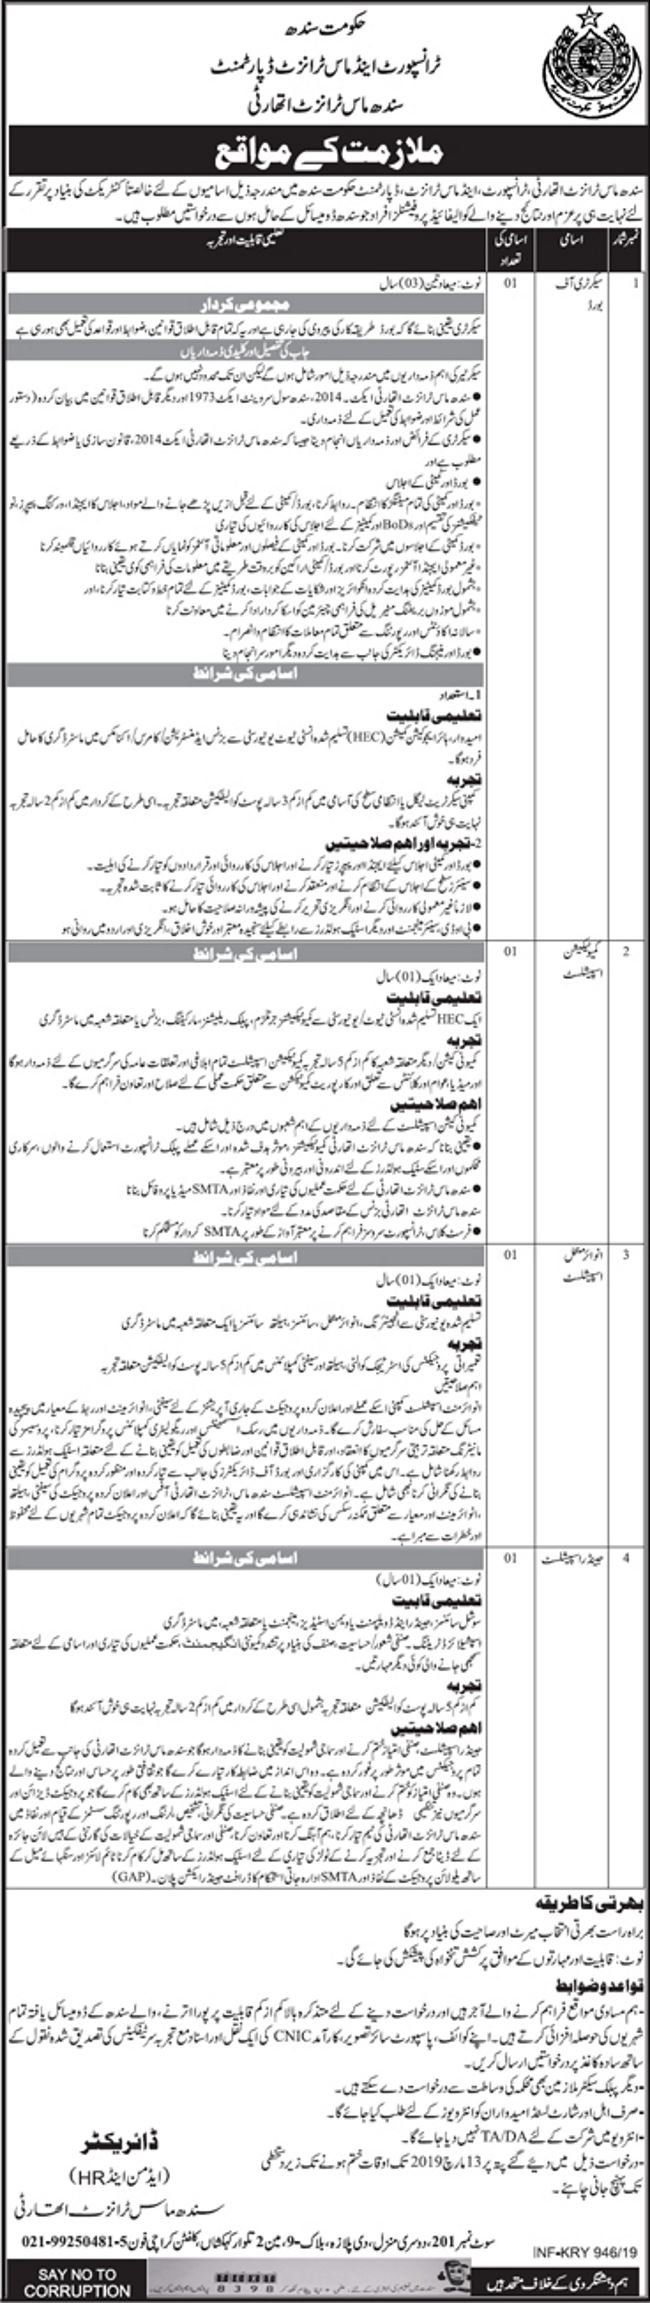 Transport & Mass Transit Department Sindh Jobs 2019 for Secretary / Management & Specialists Posts